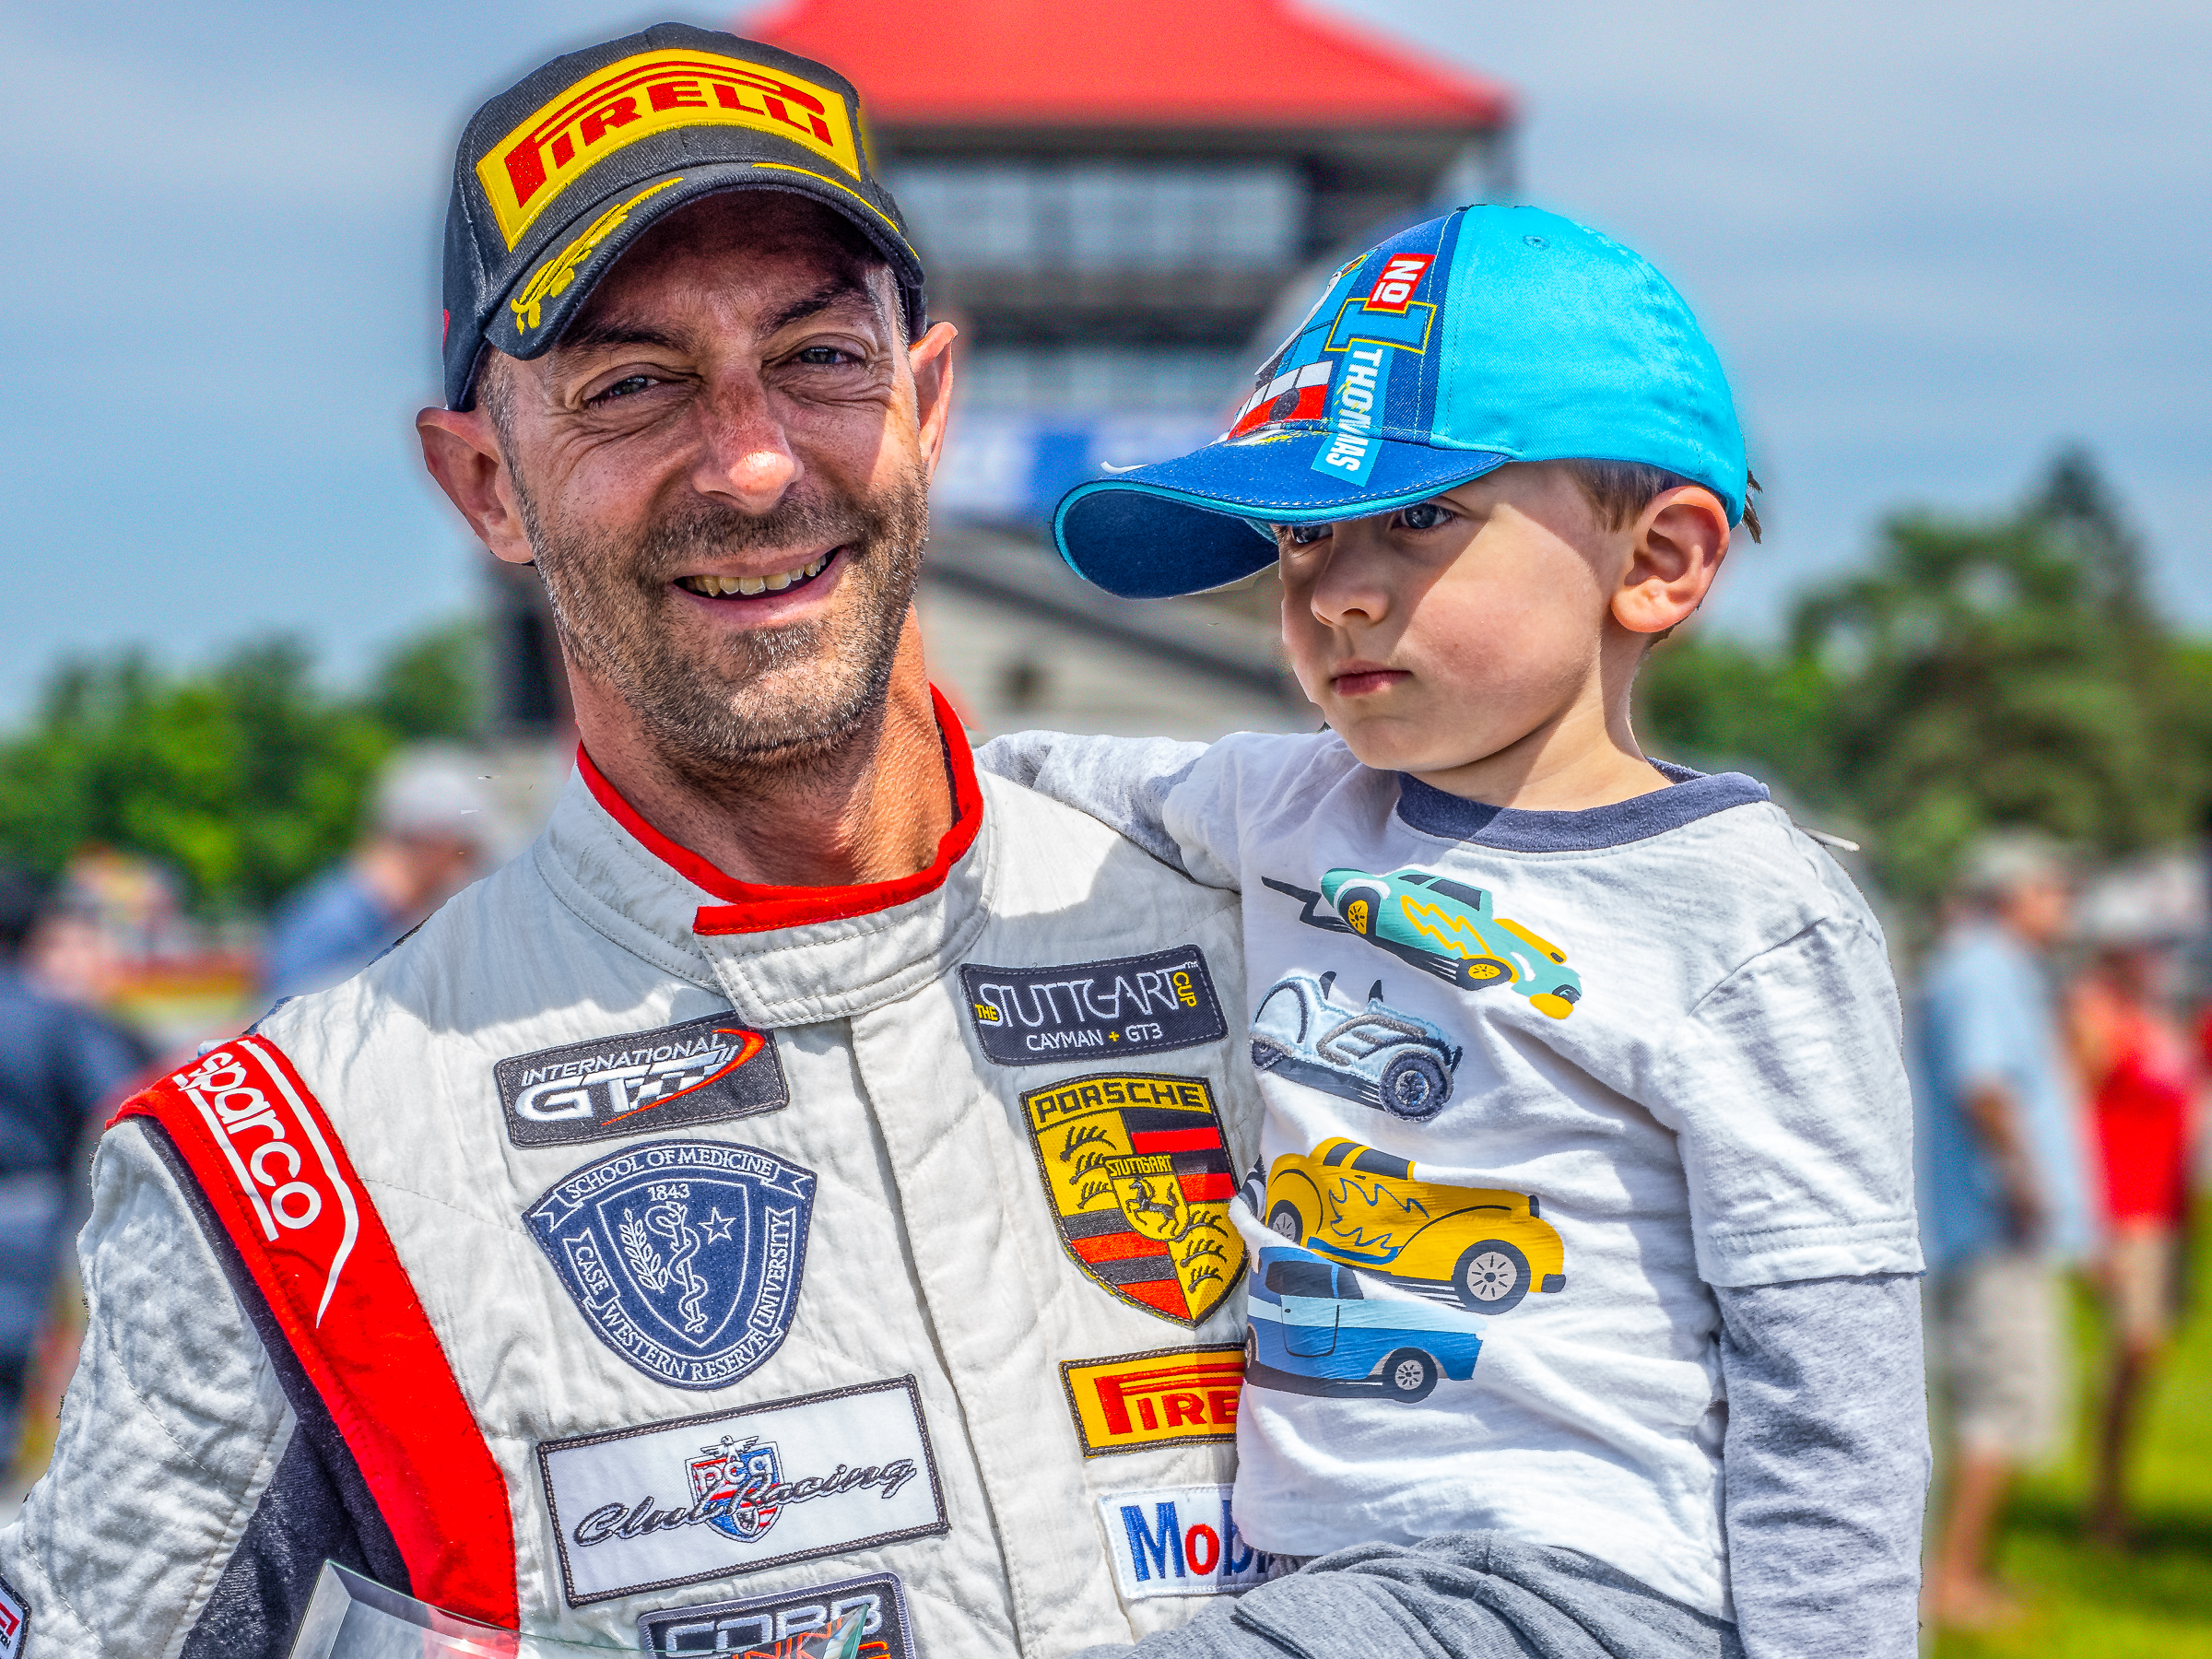 A man holding a young child in a racing suit at a speedway